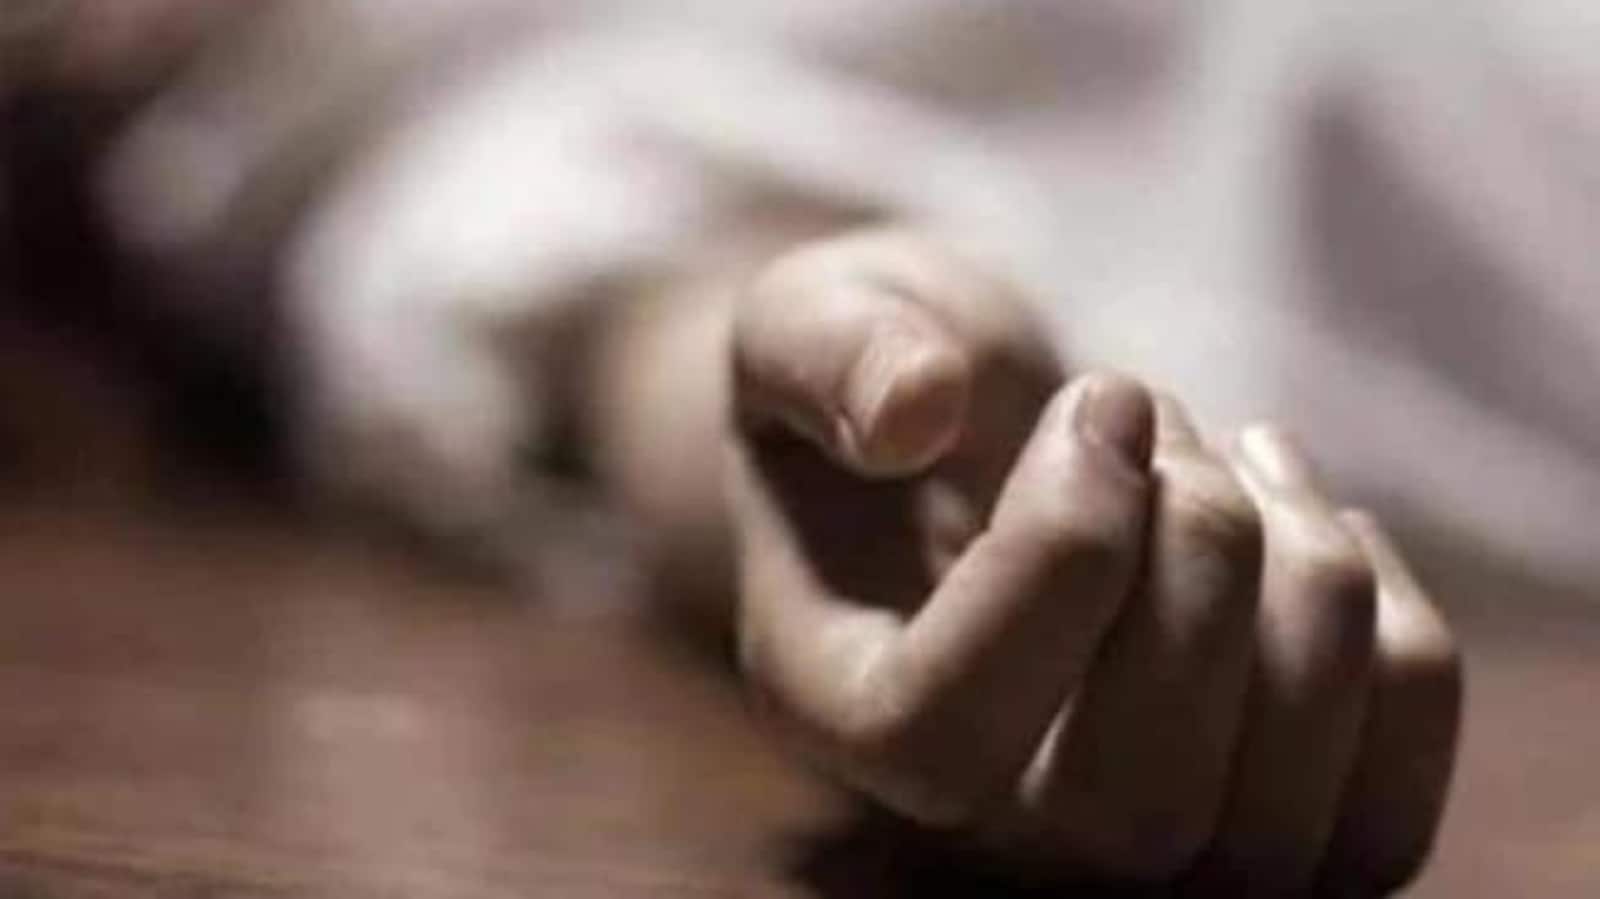 31 children died by suicide every day in 2020, reveals govt data; experts  blame Covid-19 | Latest News India - Hindustan Times